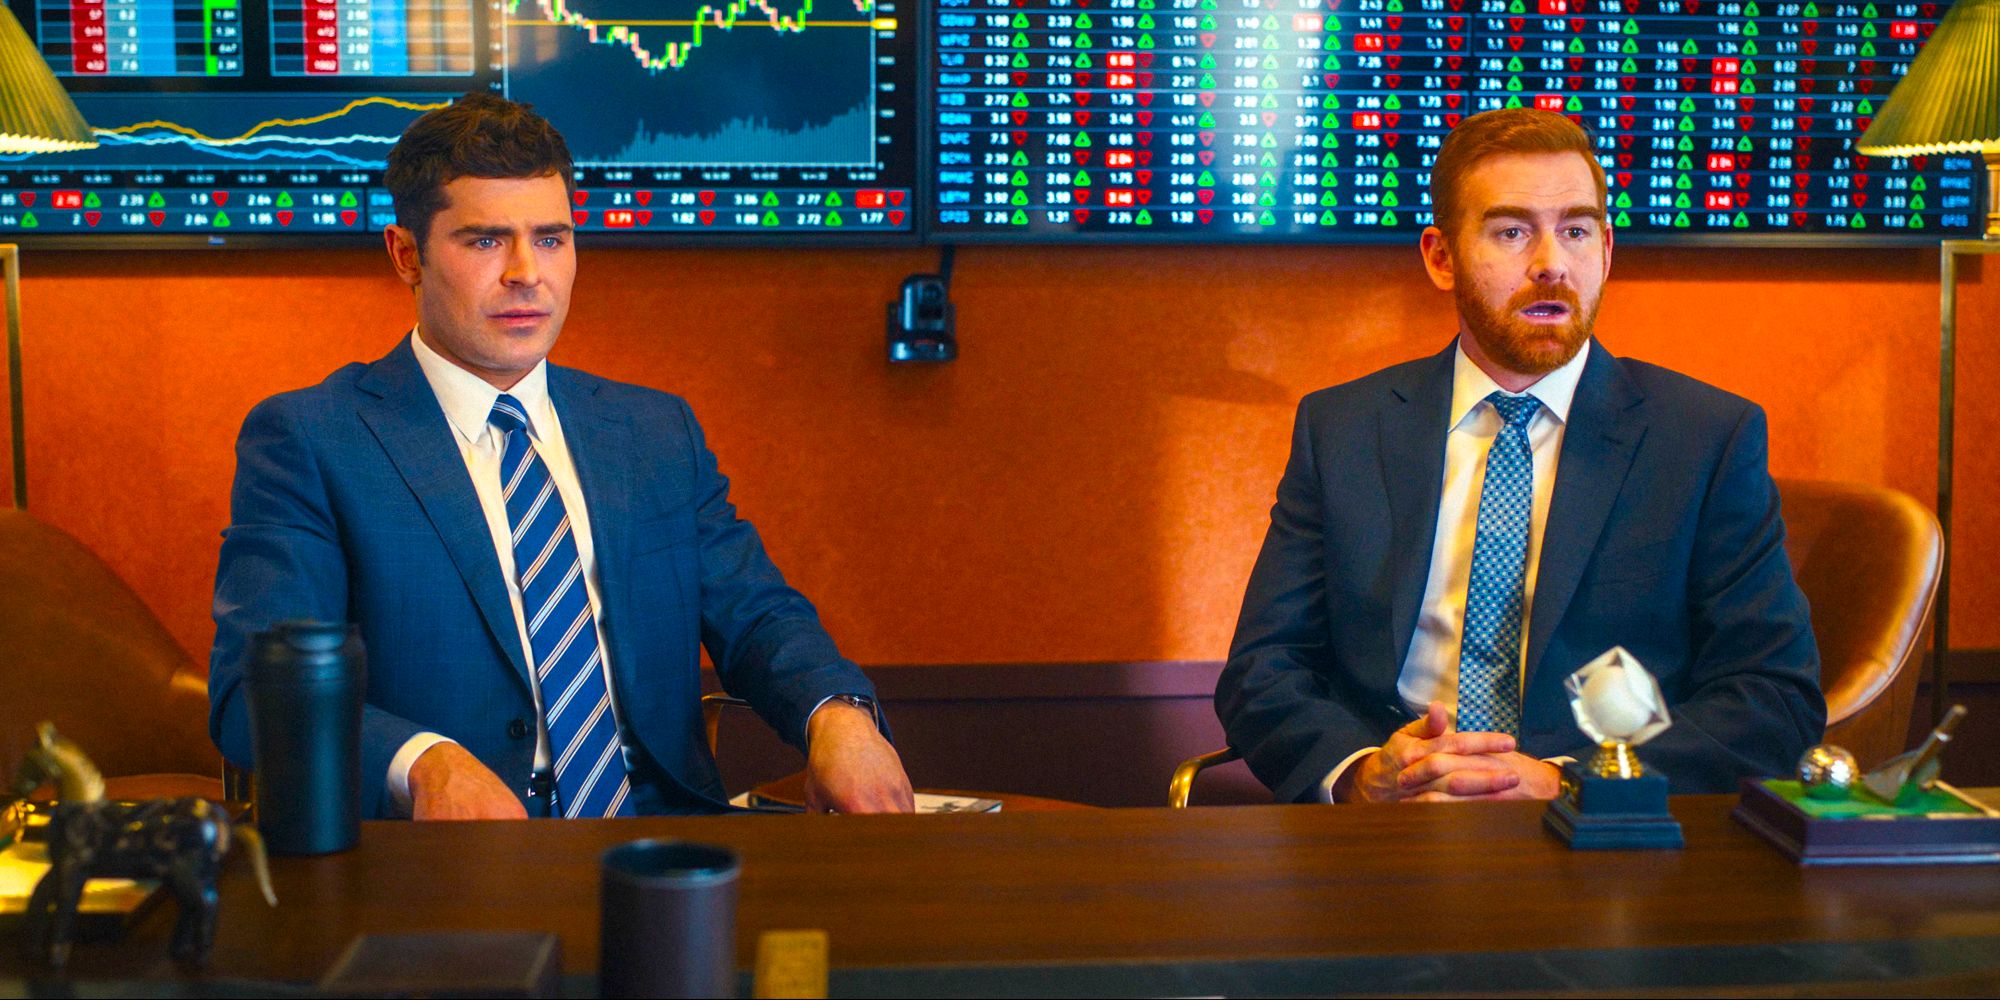 Dean and JT in suit sitting in front of charts in Ricky Stanicky